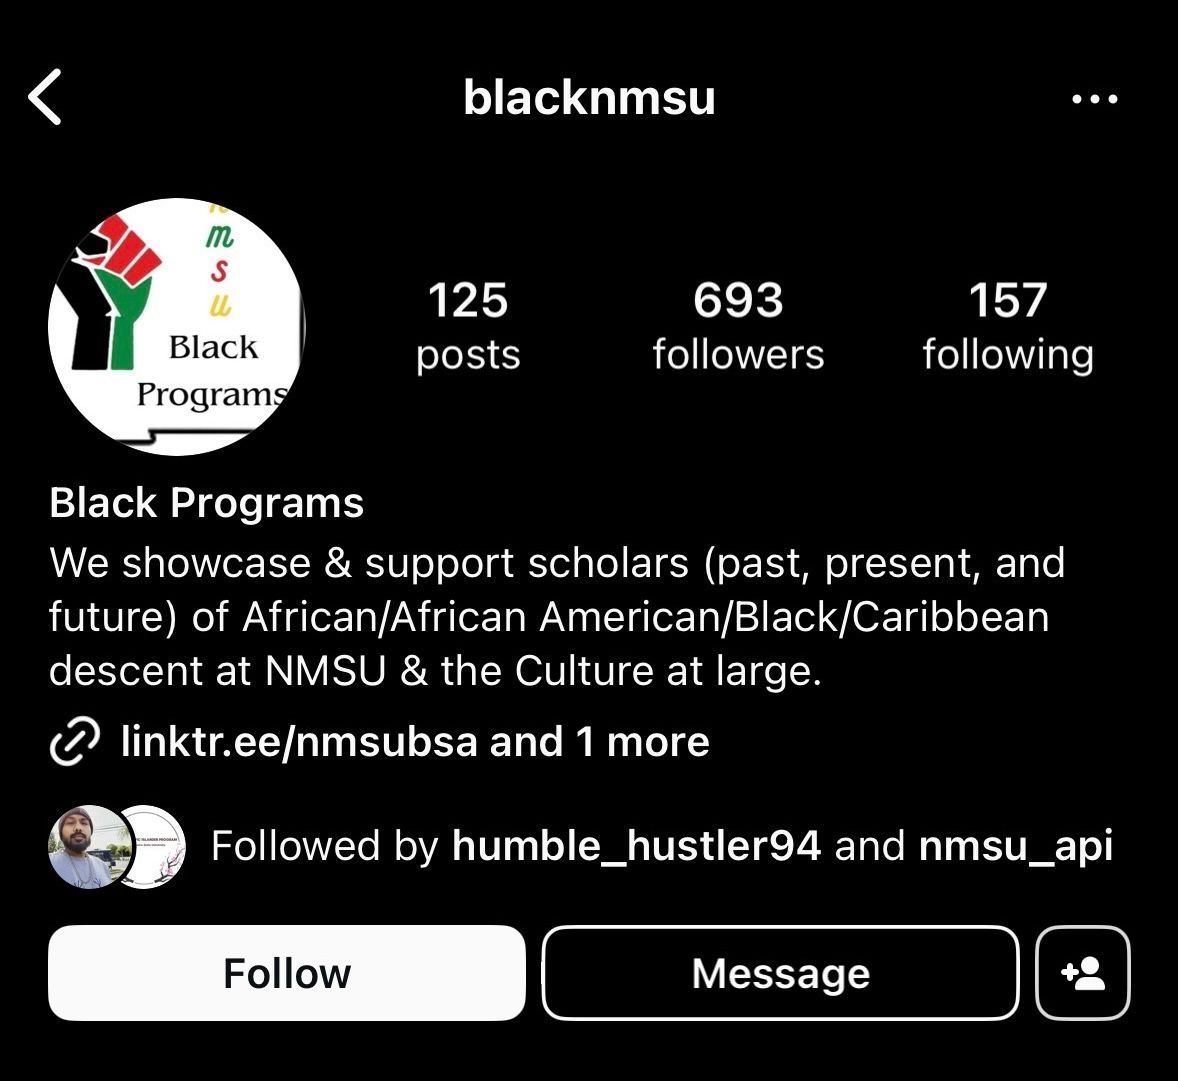 The image is a screenshot of an Instagram profile page with the username "blacknmsu." The profile picture is a logo featuring a black, red, and green raised fist, which is divided into three vertical segments, each colored differently. To the right of the fist, there is text reading "Black Programs." The background of the logo is white.  Directly below the username, three main statistics are listed horizontally:  125 posts 693 followers 157 following The profile’s bio section includes a short description and a link. The description reads: "We showcase & support scholars (past, present, and future) of African/African American/Black/Caribbean descent at NMSU & the Culture at large." Below the bio, there is a clickable link "linktr.ee/nmsubsa and 1 more."